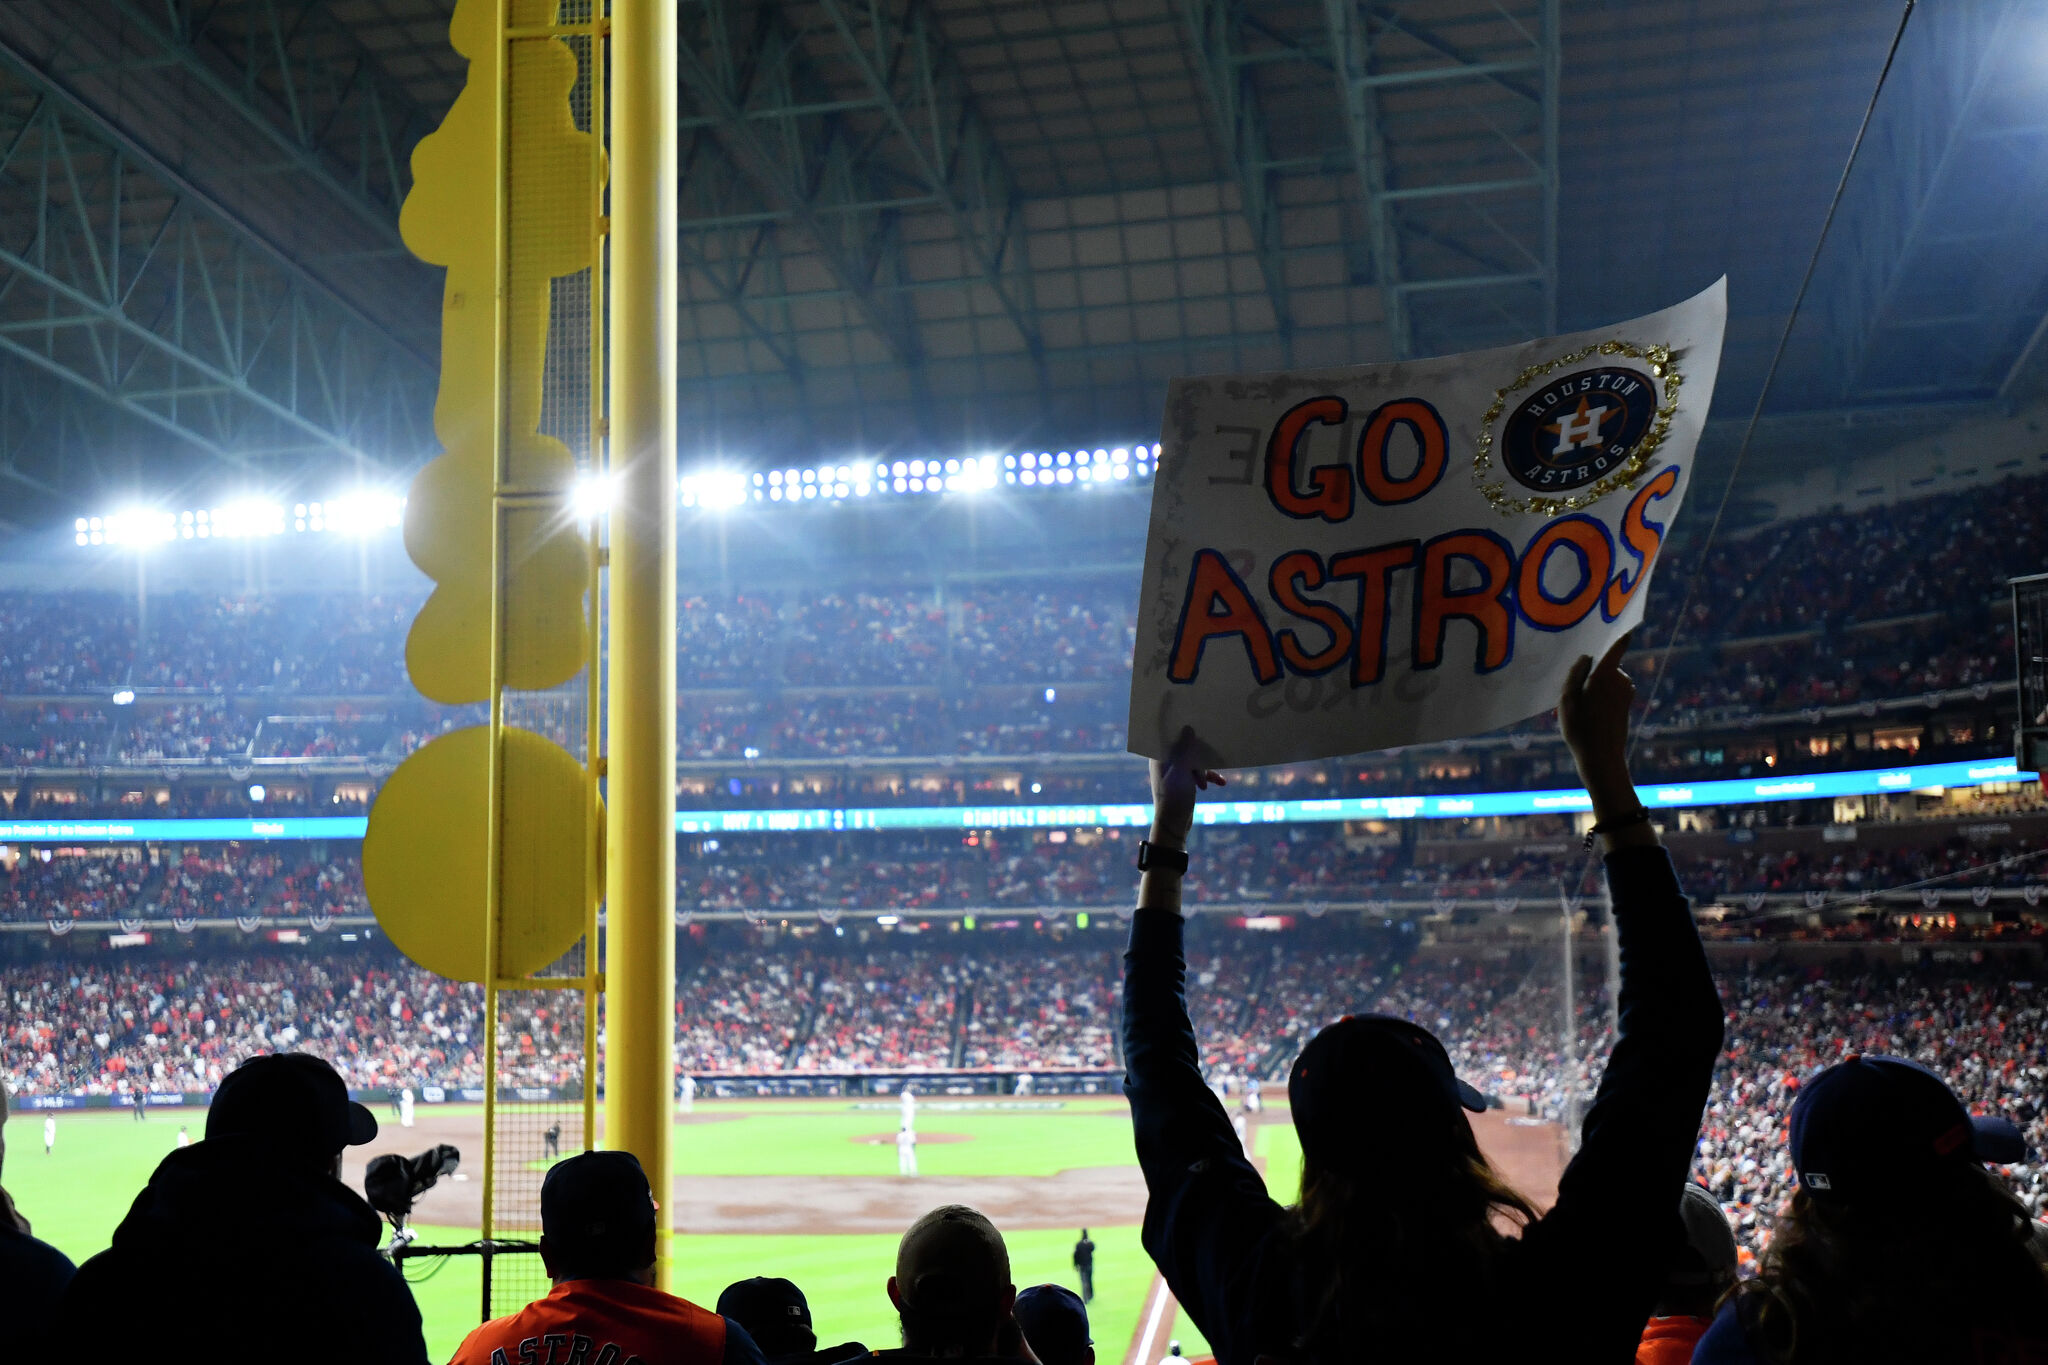 Yankees fans asked for it… #houston #astros #yankees #wewanthouston, Houston Astros